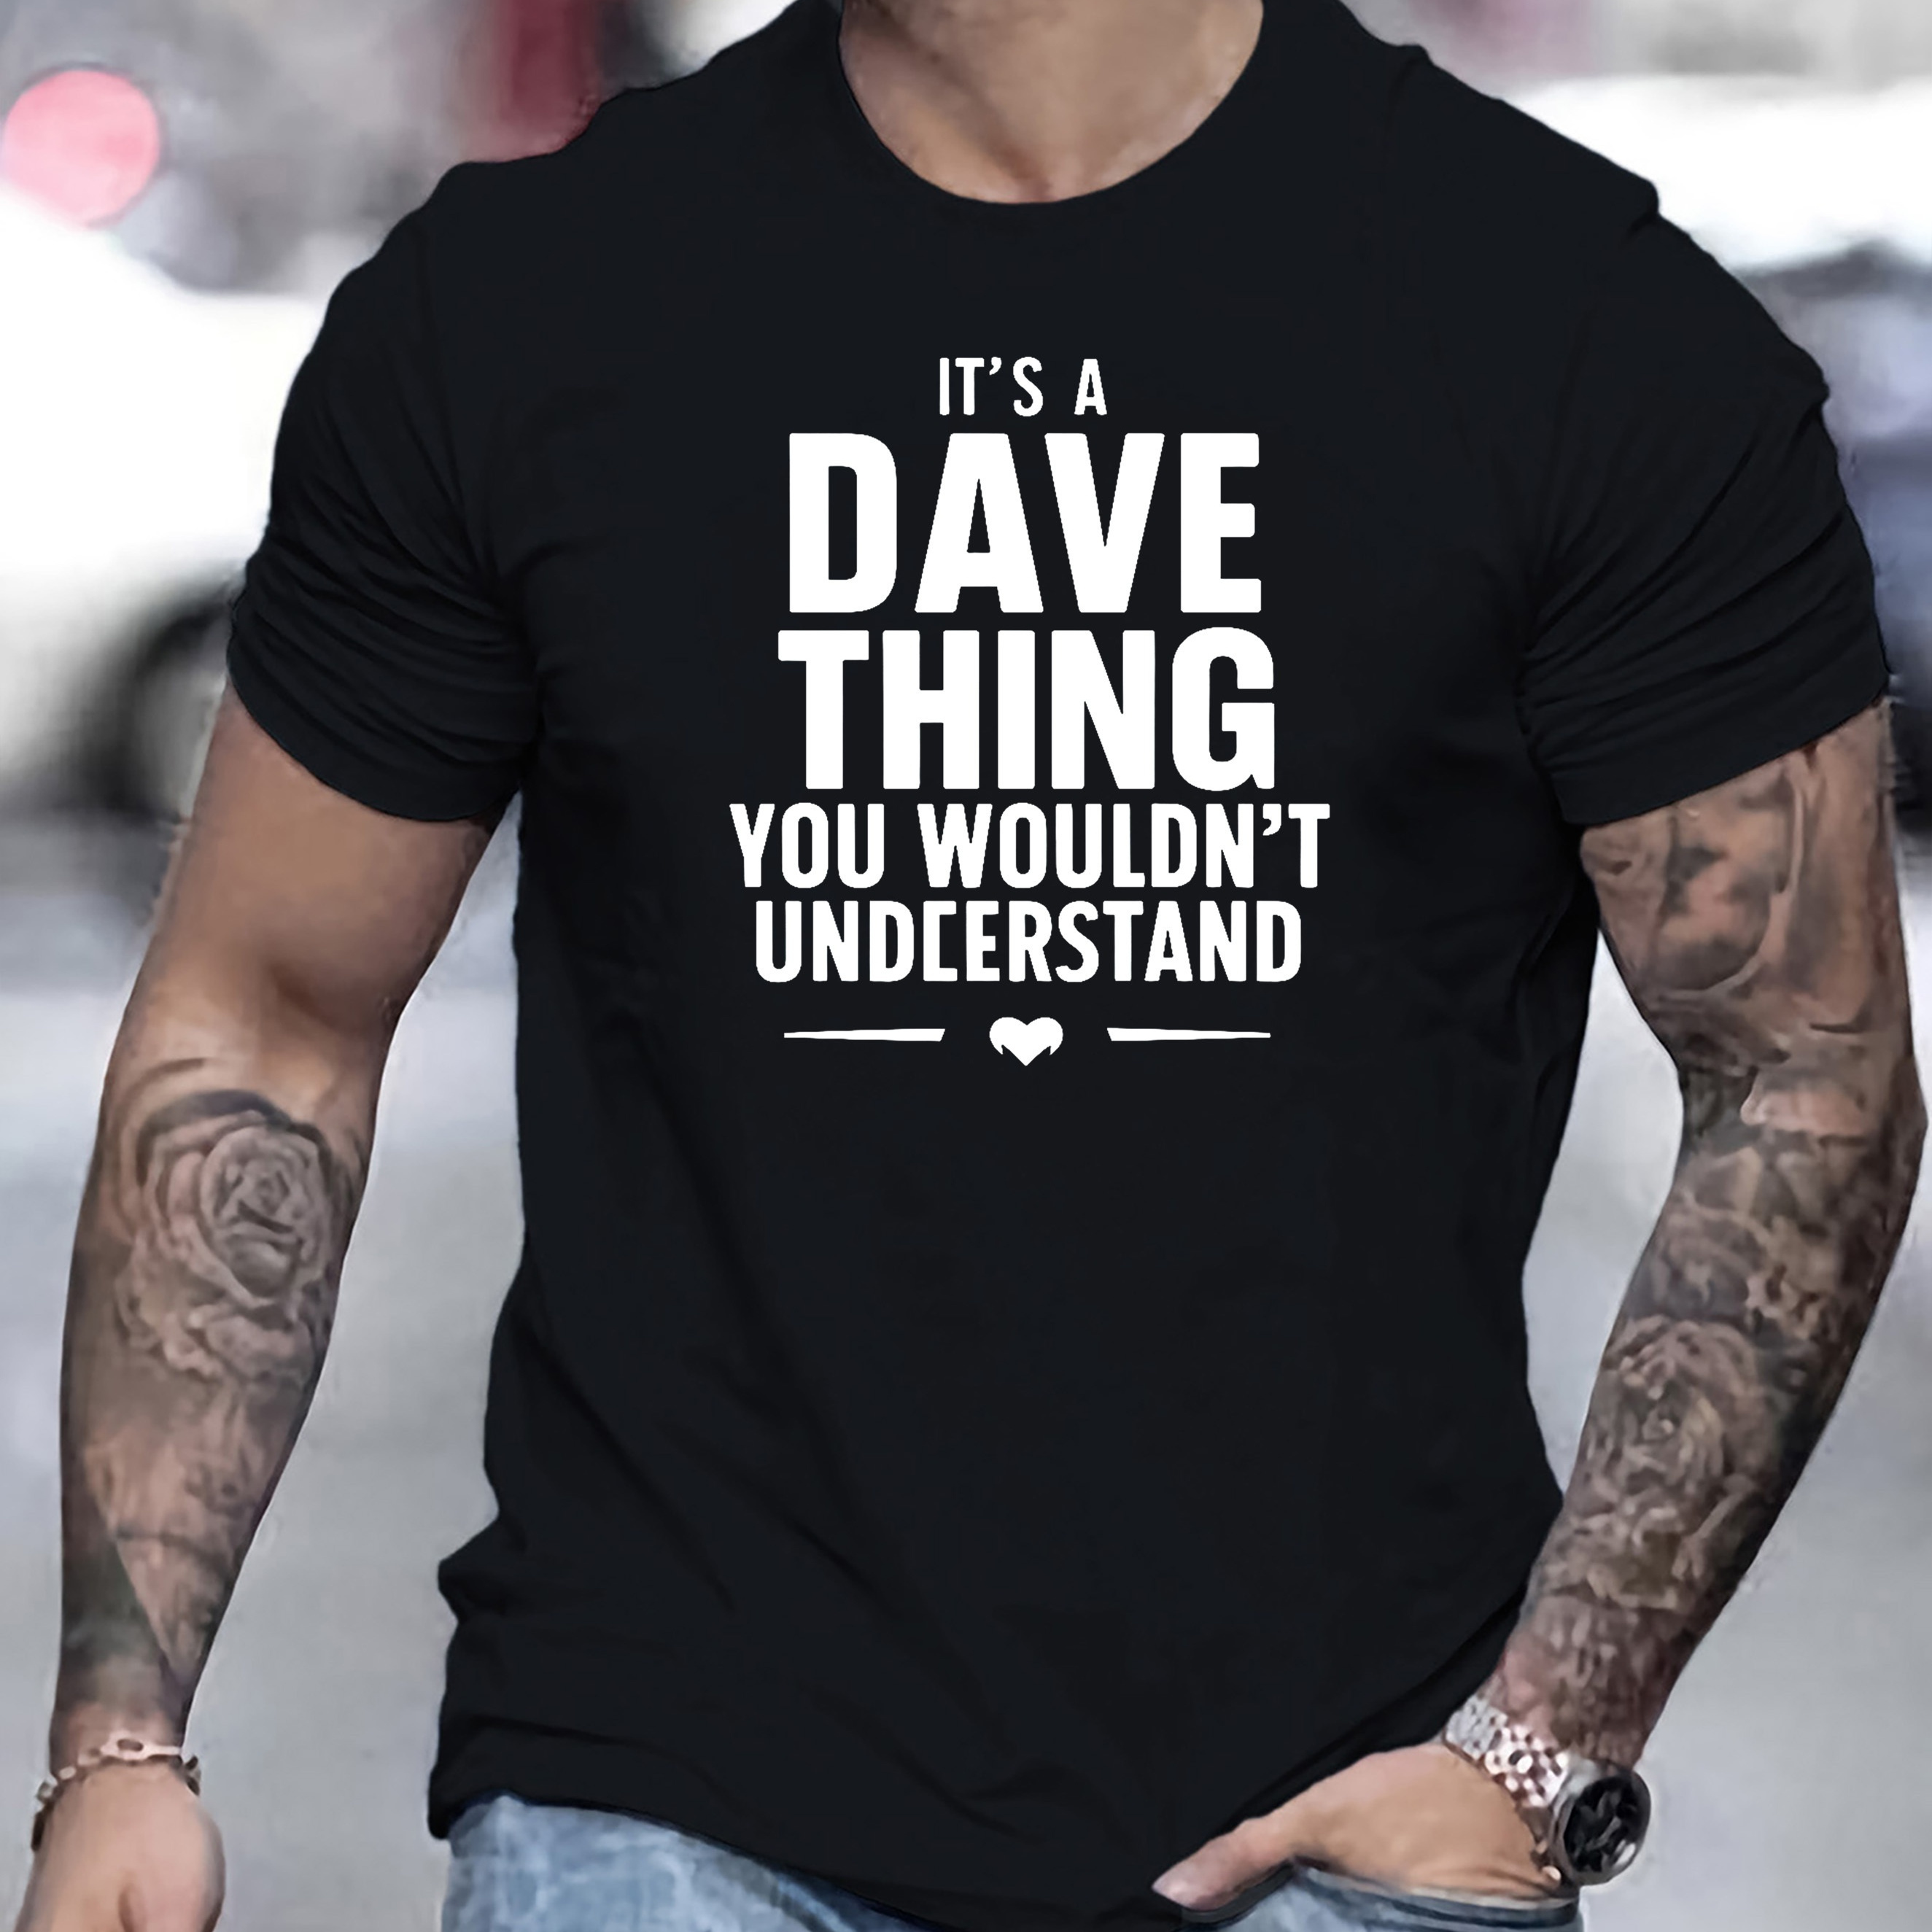 

It's A Dave Thing"trendy Print Casual Short-sleeved T-shirt For Men, Spring And Summer Top, Comfortable Round Neck Tee, Regular Fit, Versatile Fashion For Everyday Wear